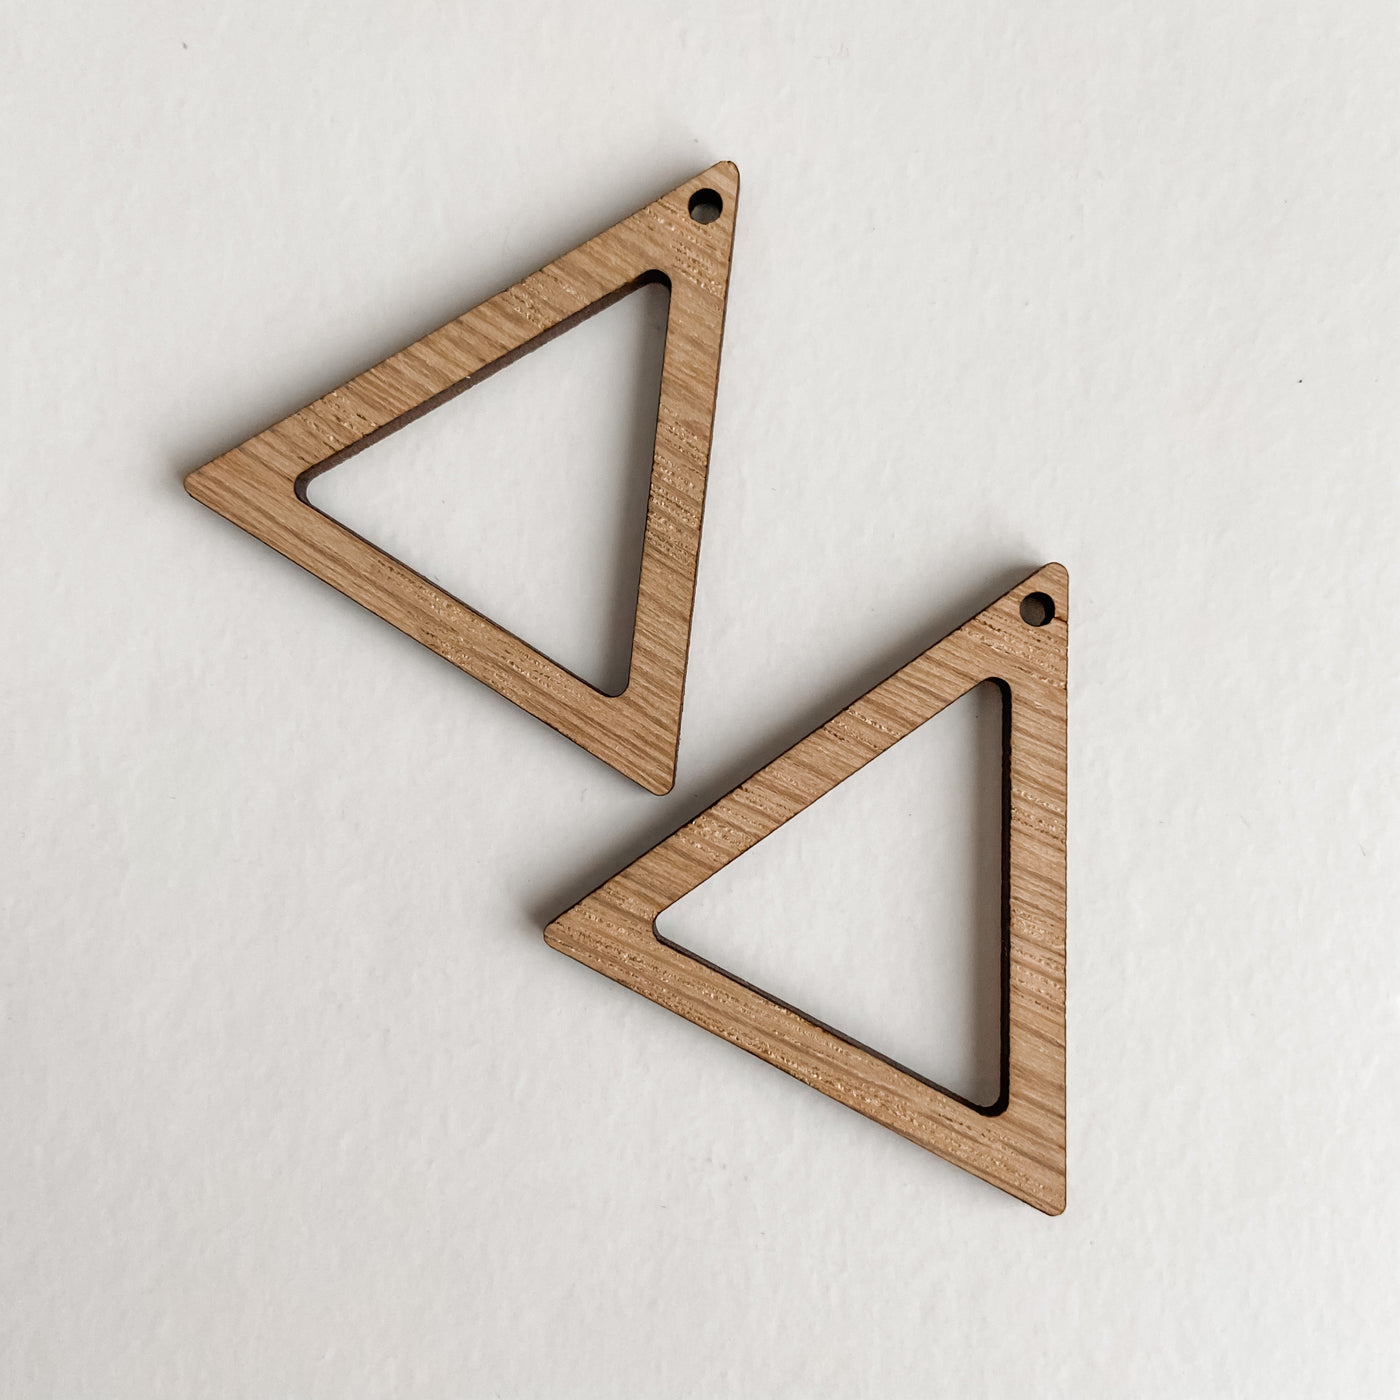 Accessories - Bamboo Earrings Triangle